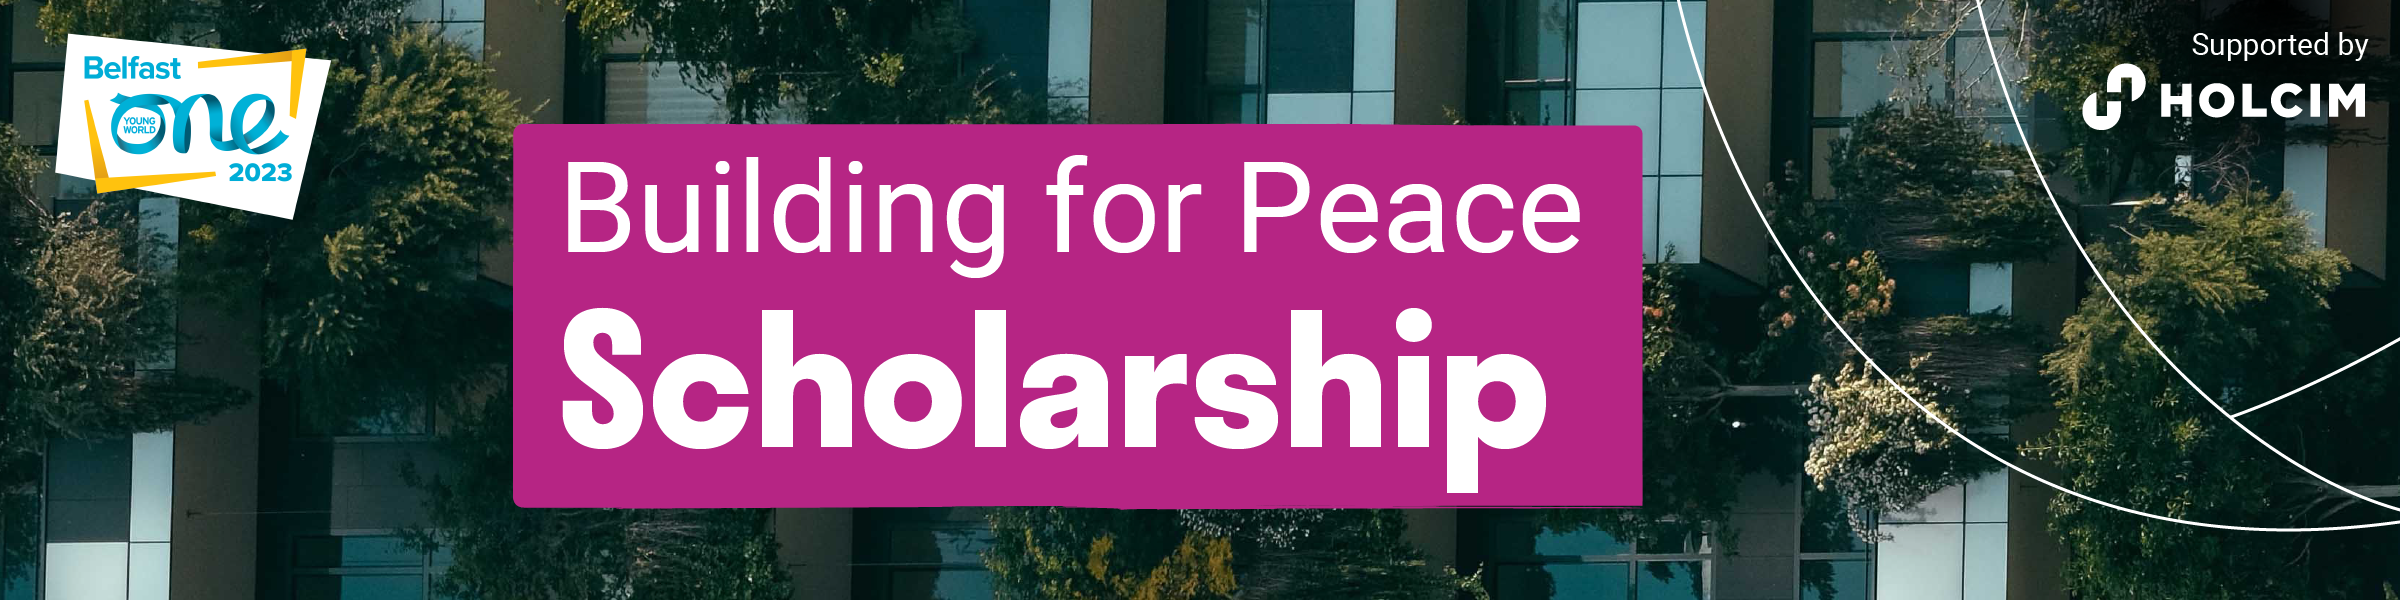 Building for Peace Scholarship